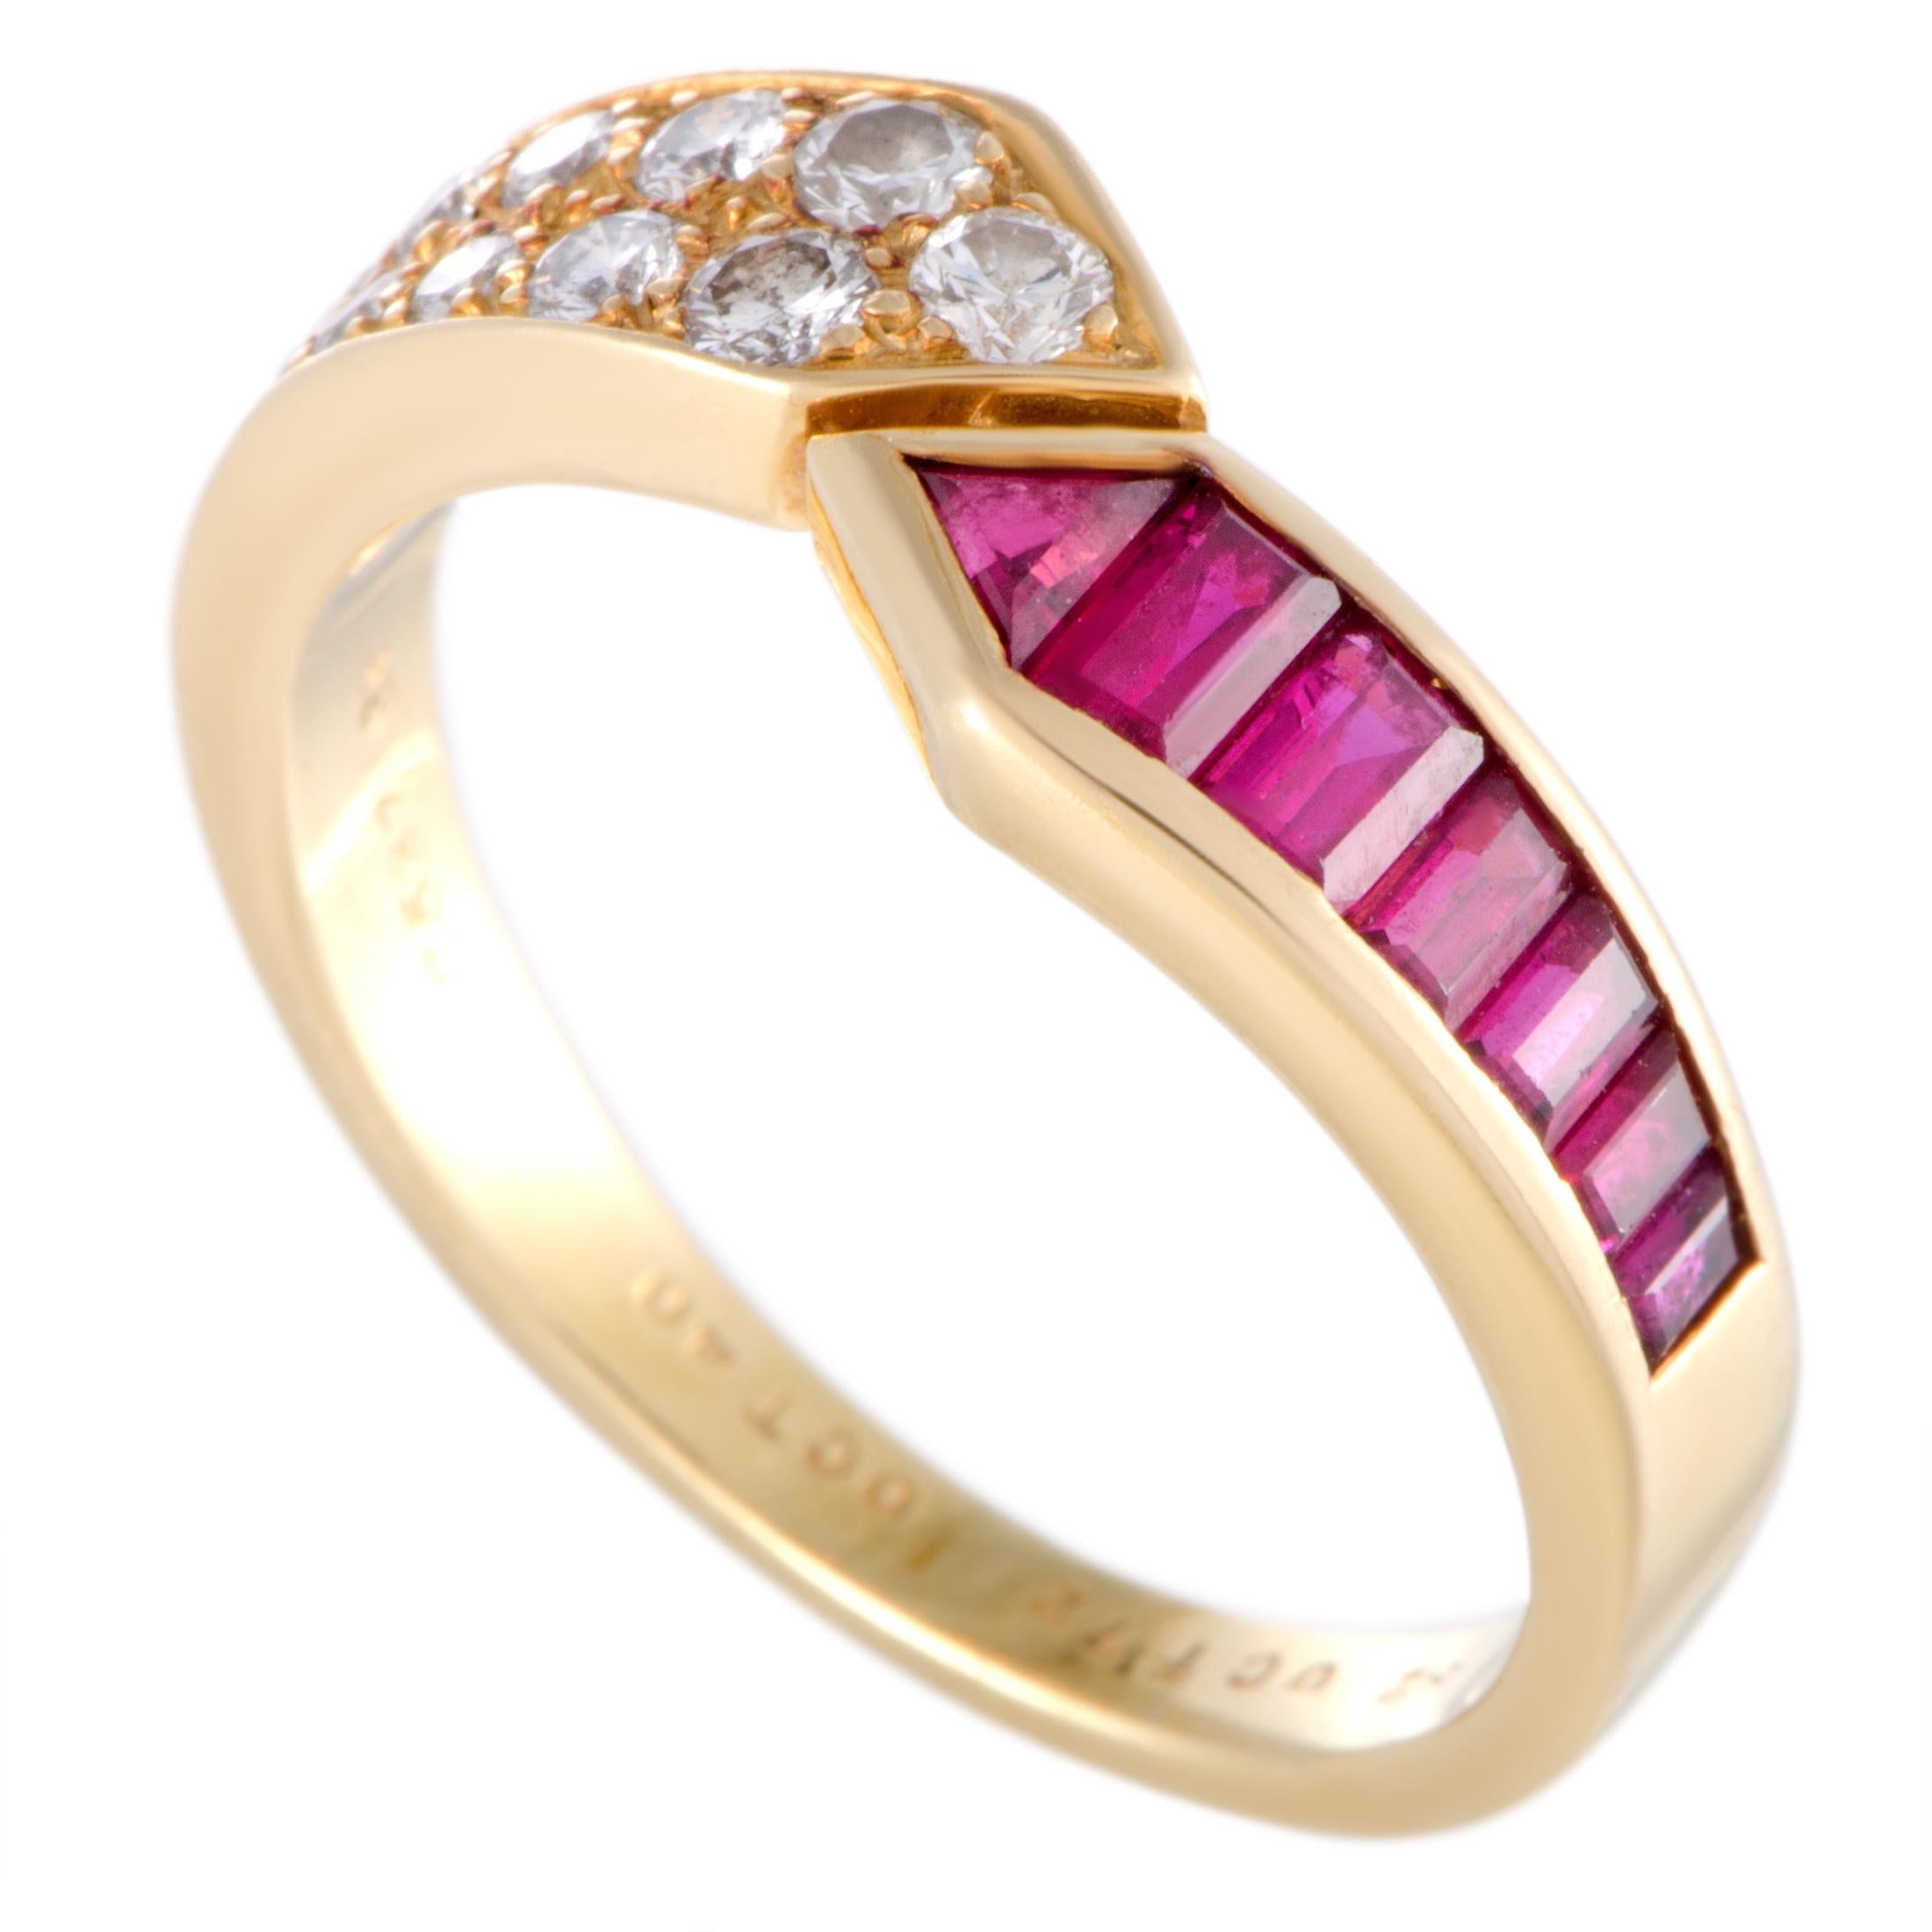 Van Cleef & Arpels Diamond Pave Ruby Invisible Setting Yellow Gold Band Ring